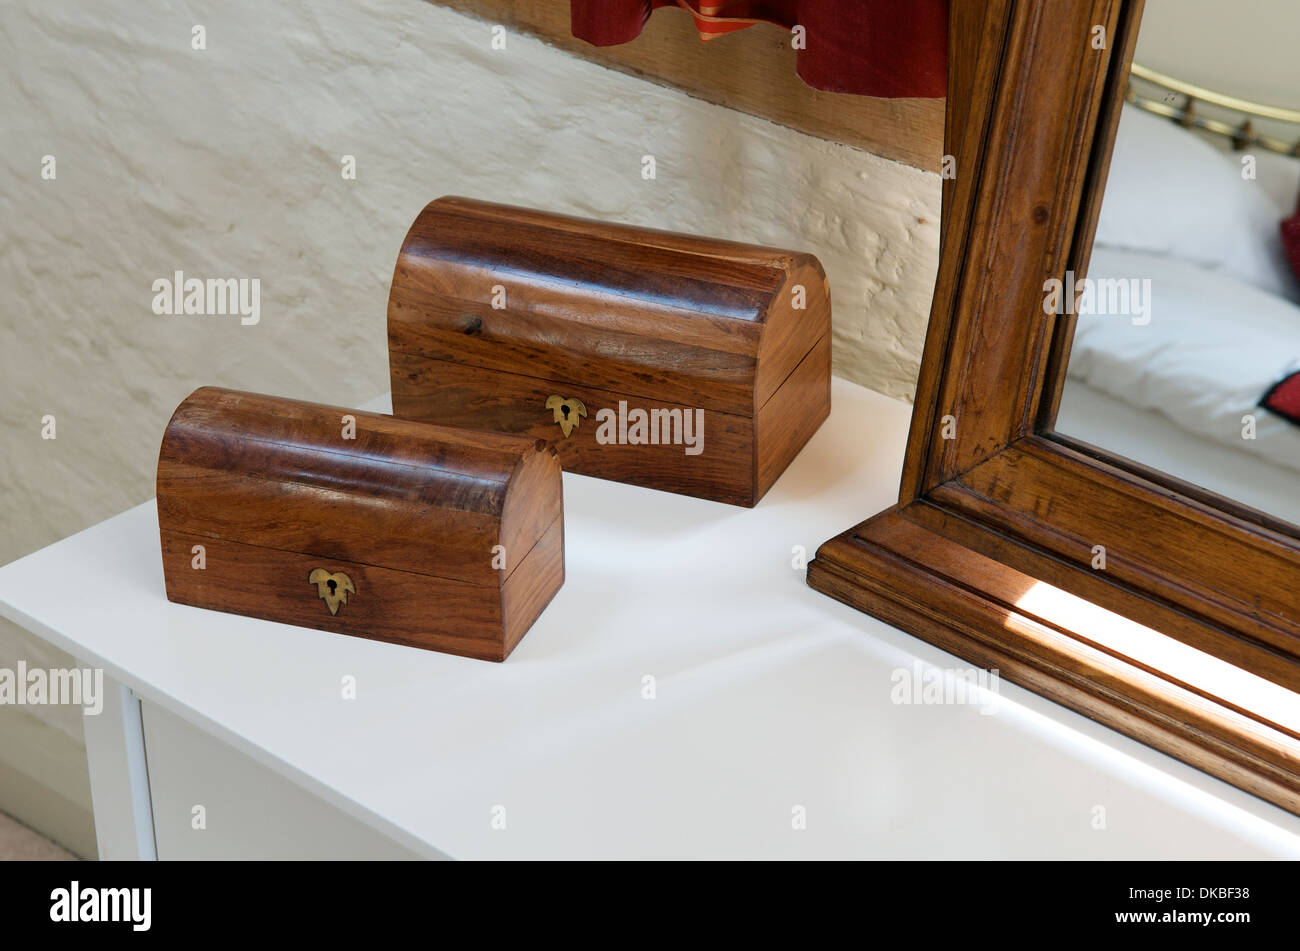 Wooden caskets on a dressing table Stock Photo